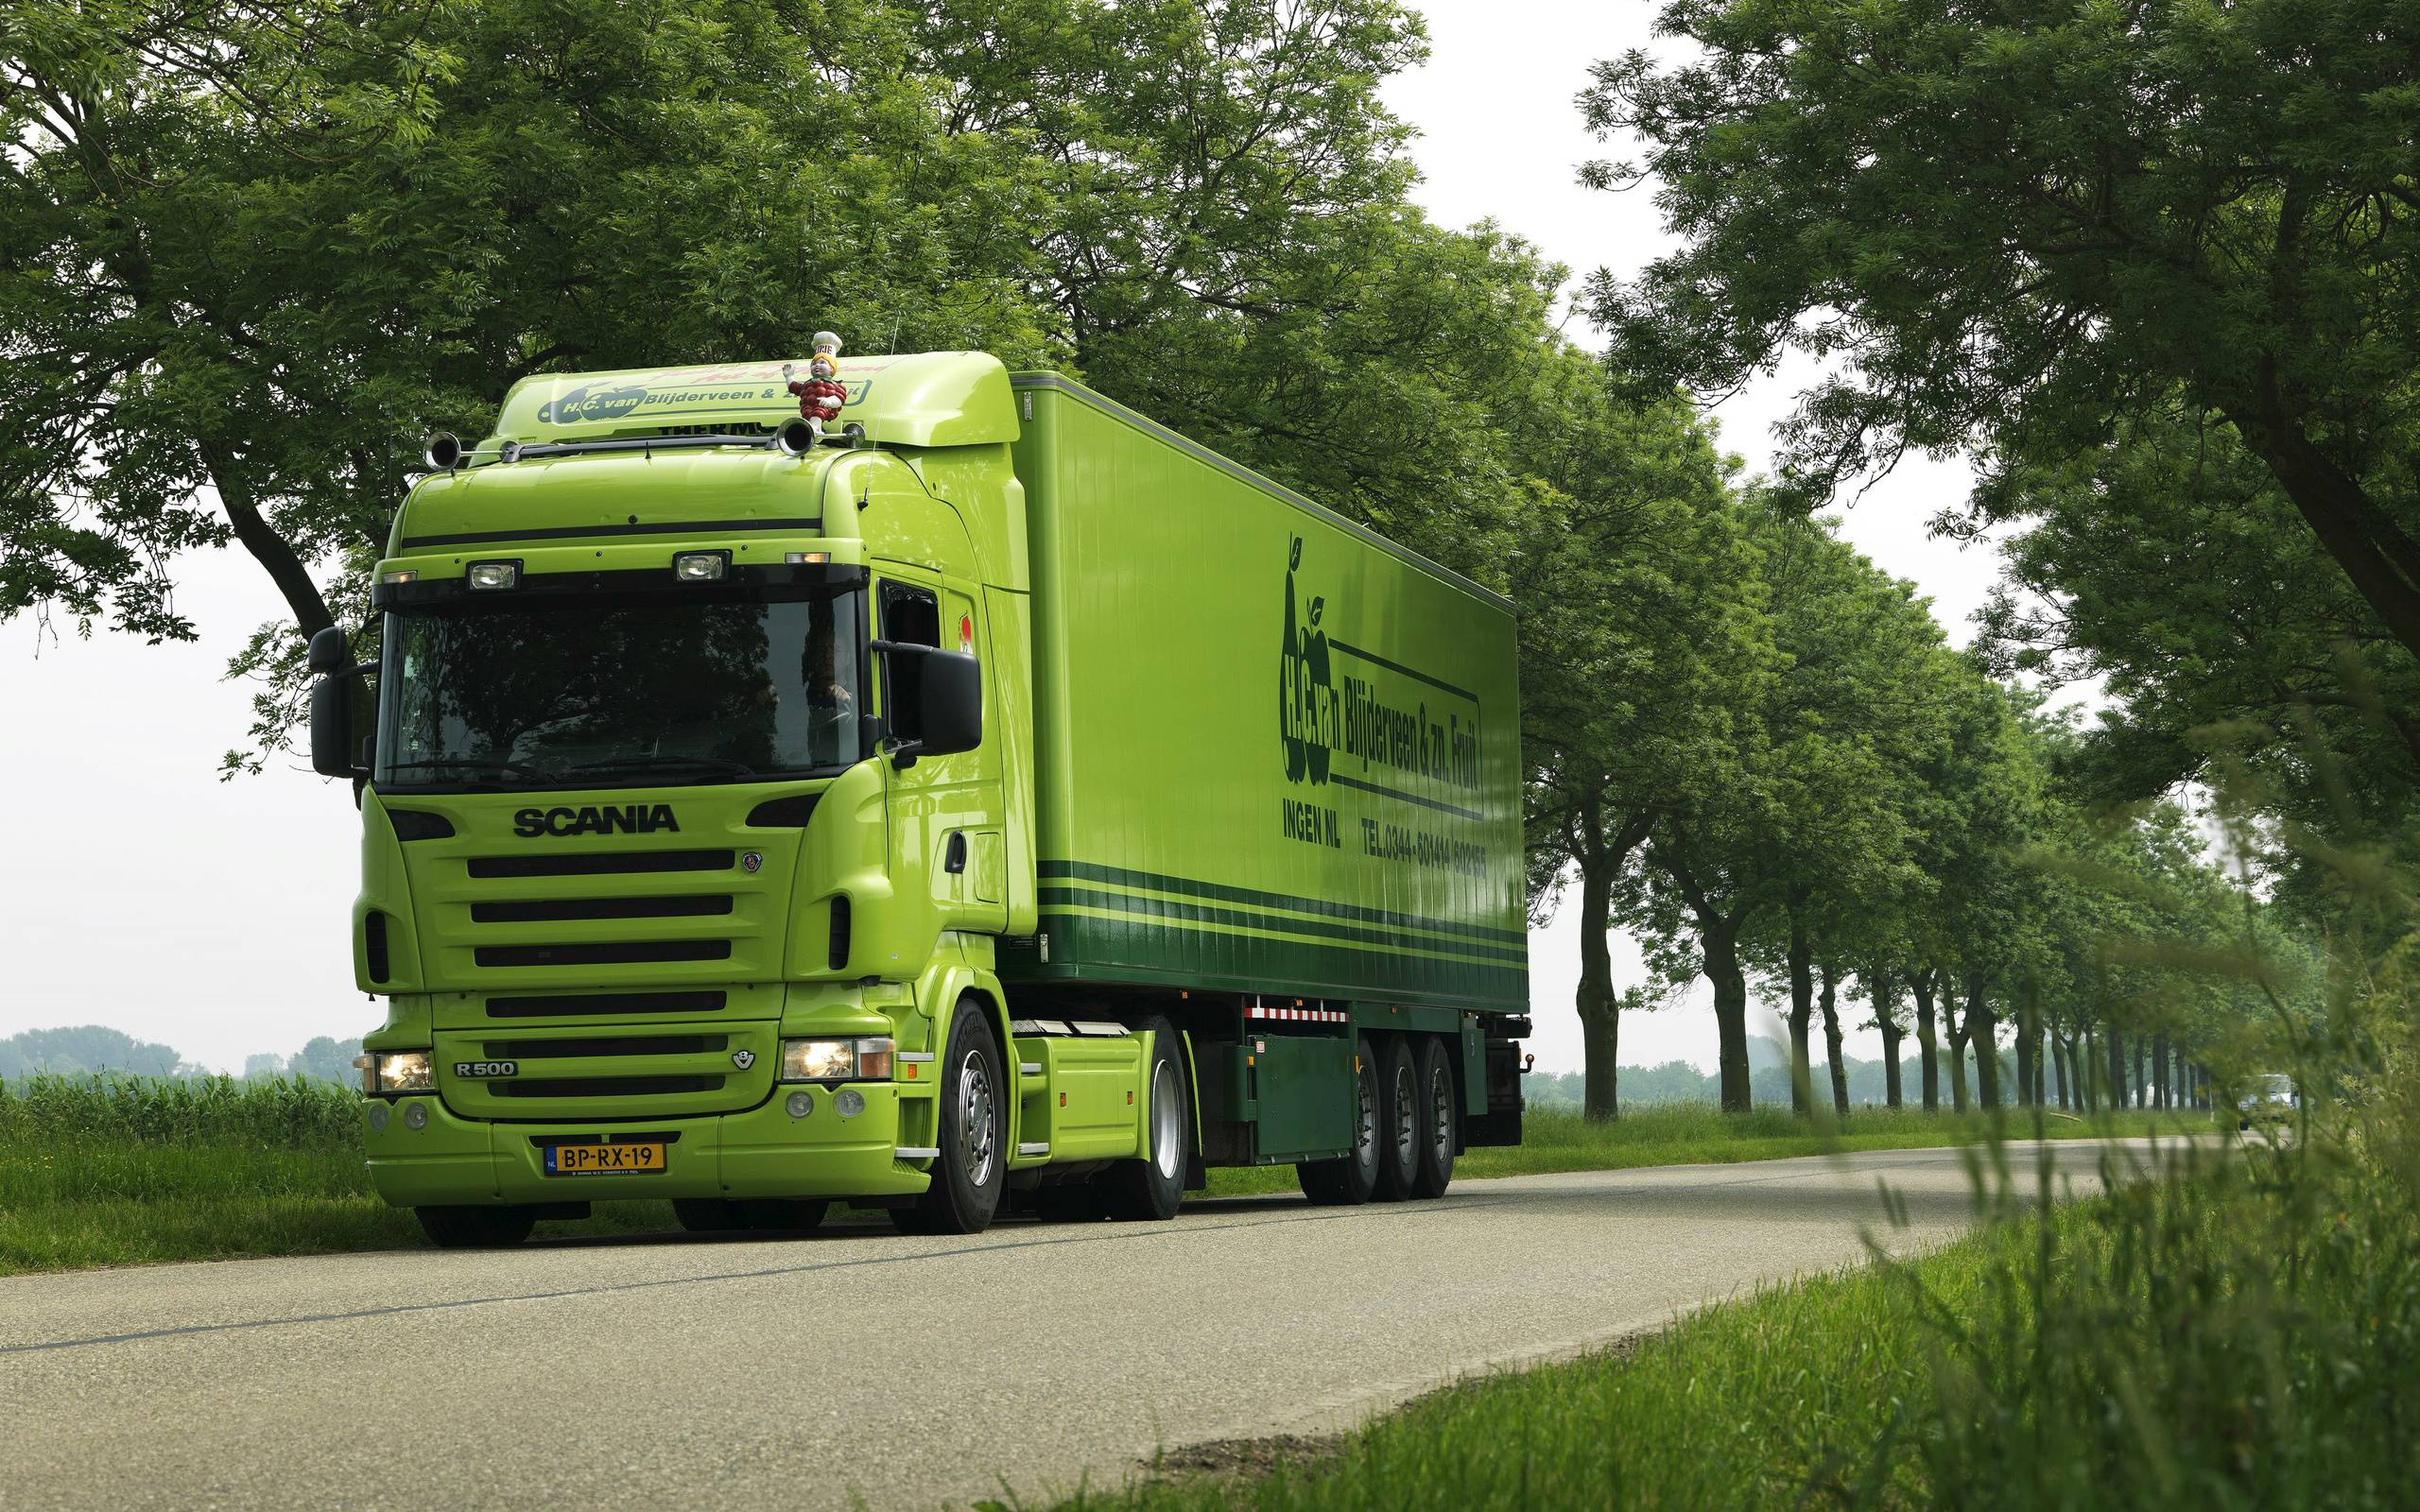 Scania Trucks Wallpapers Free Image For Commercial Use